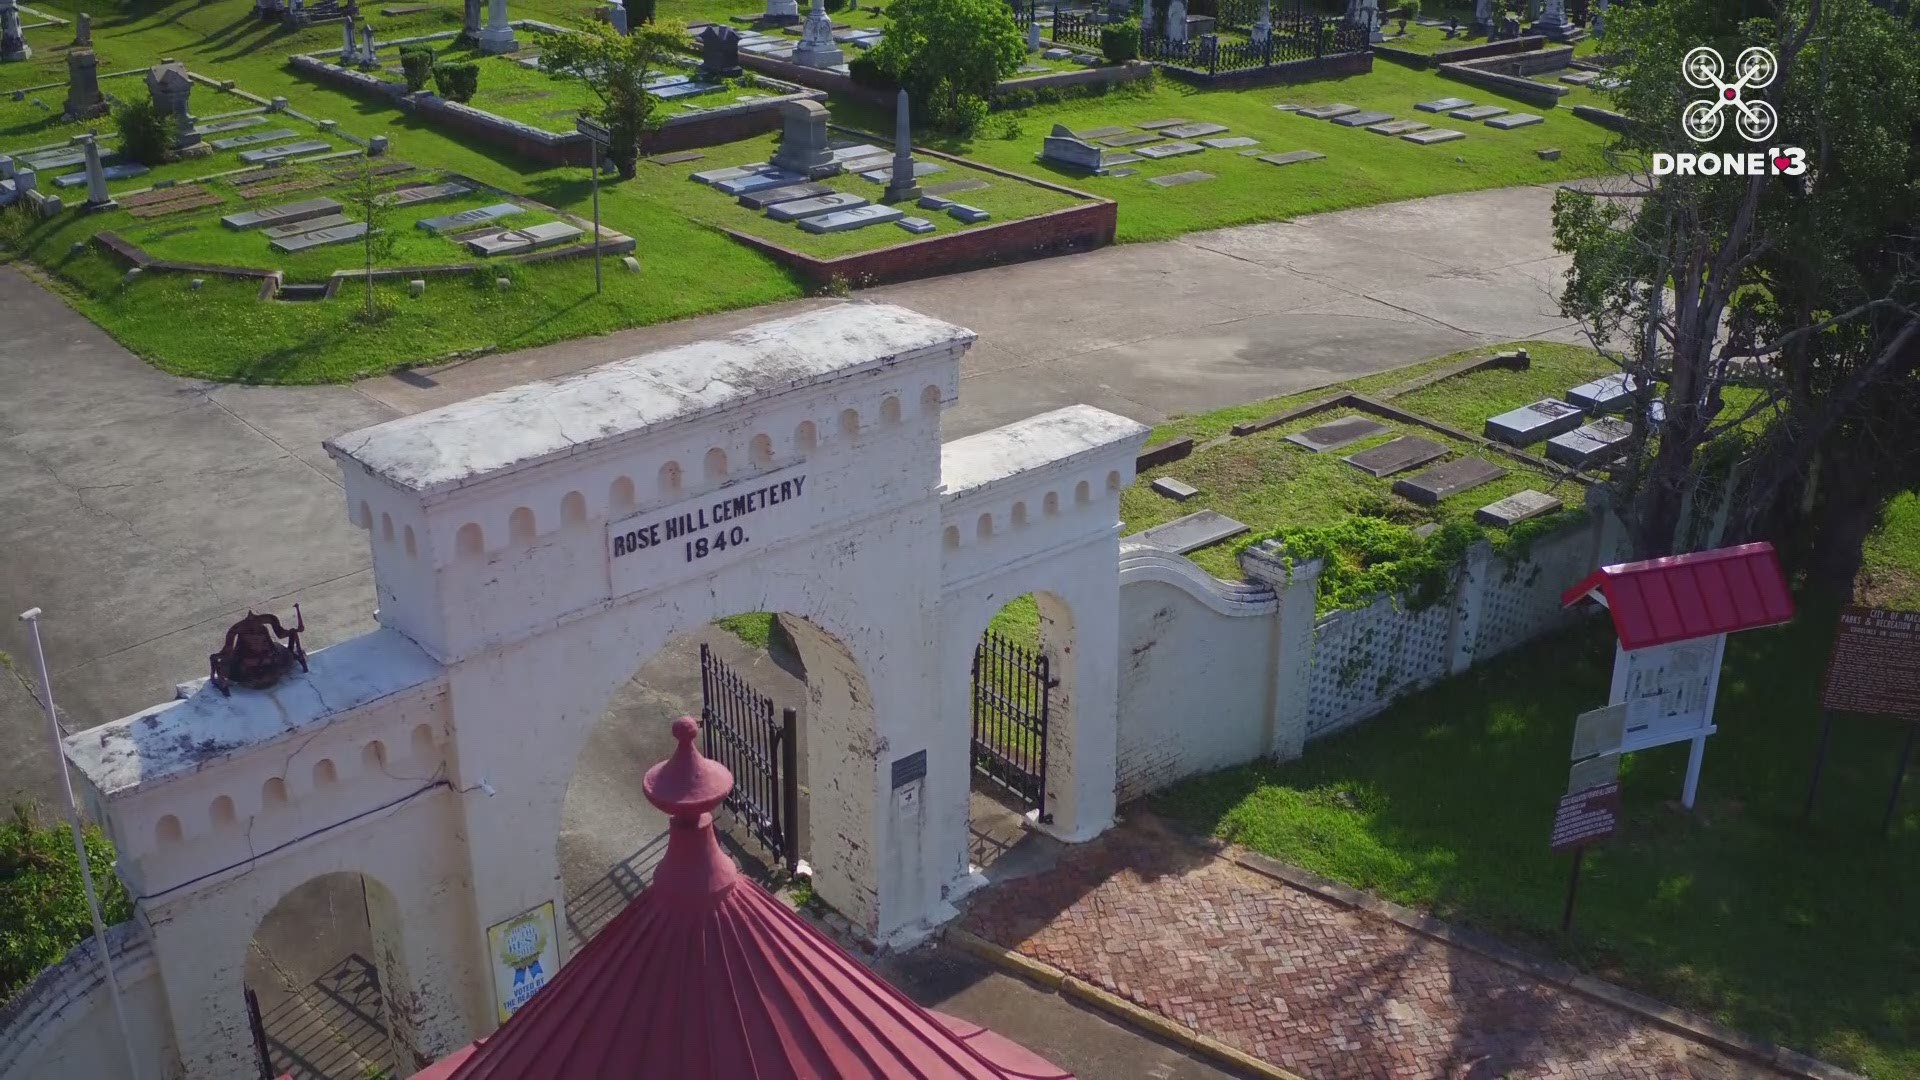 Fans from around the world make pilgrimages to visit the Allman Brothers graves in Macon, but our #drone13 crew discovered there are many more sights to enjoy in Rose Hill Cemetery.